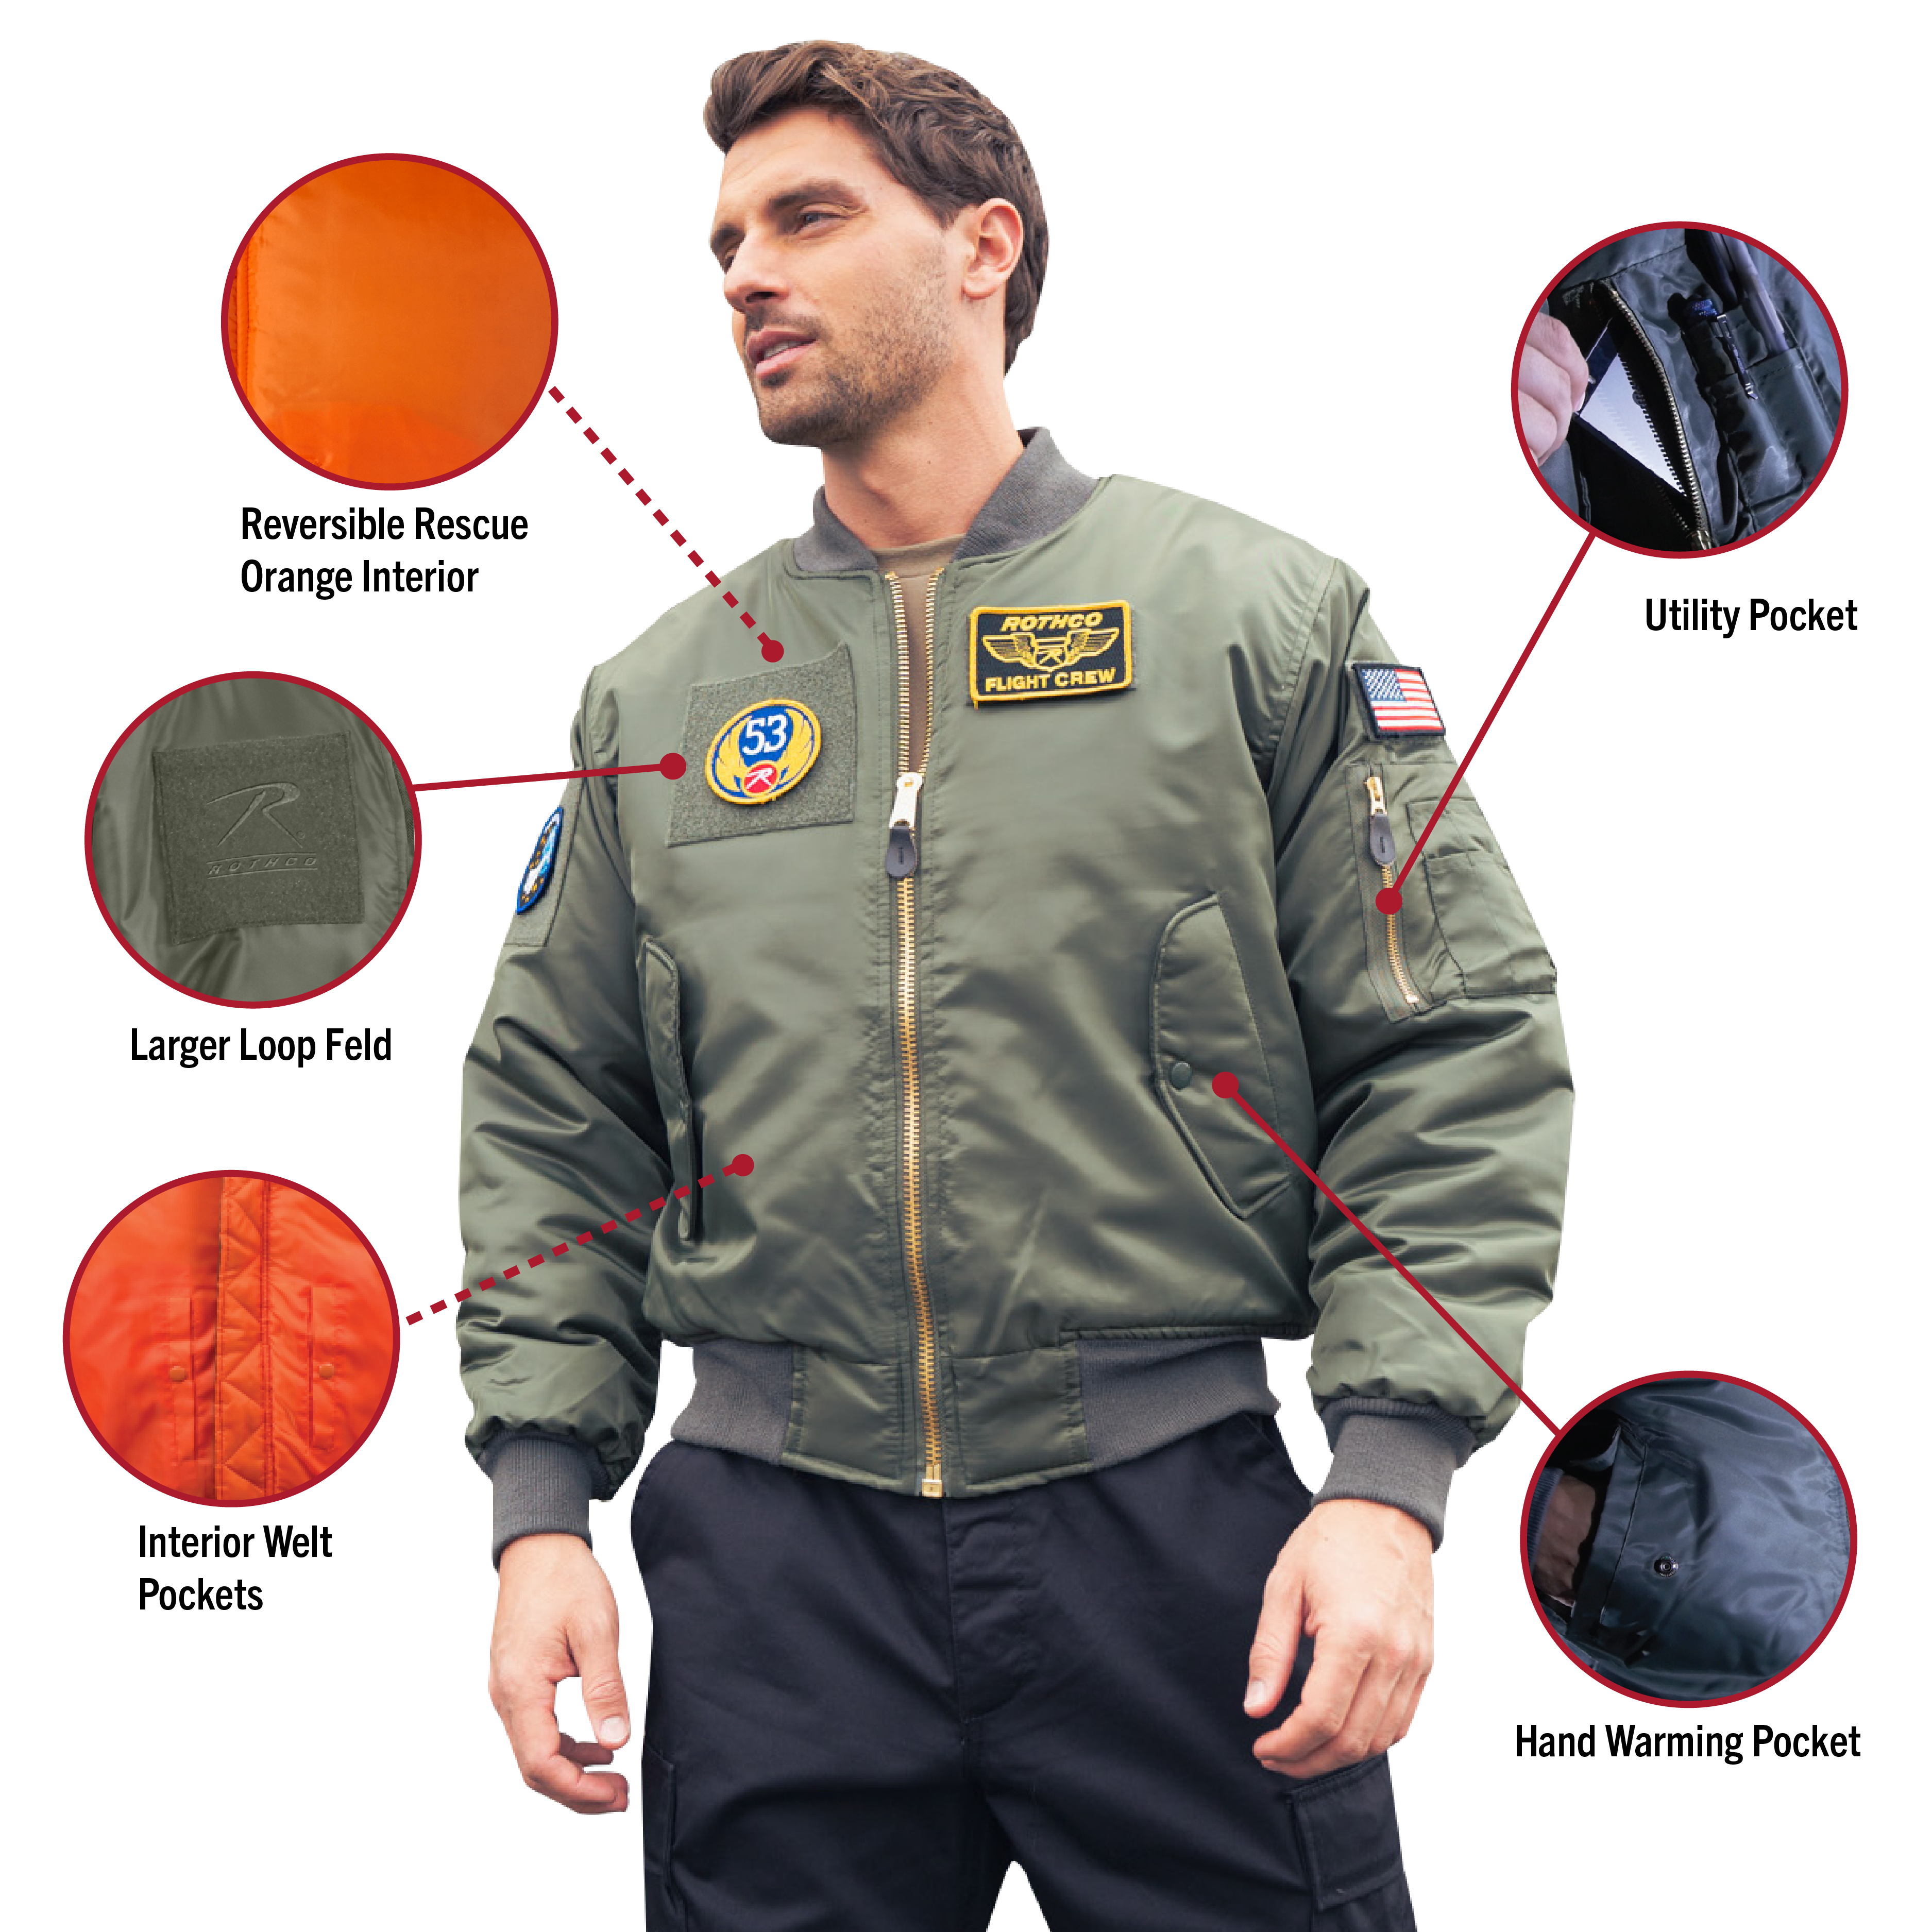 Rothco MA-1 Flight Jacket with Patches - image 2 of 6